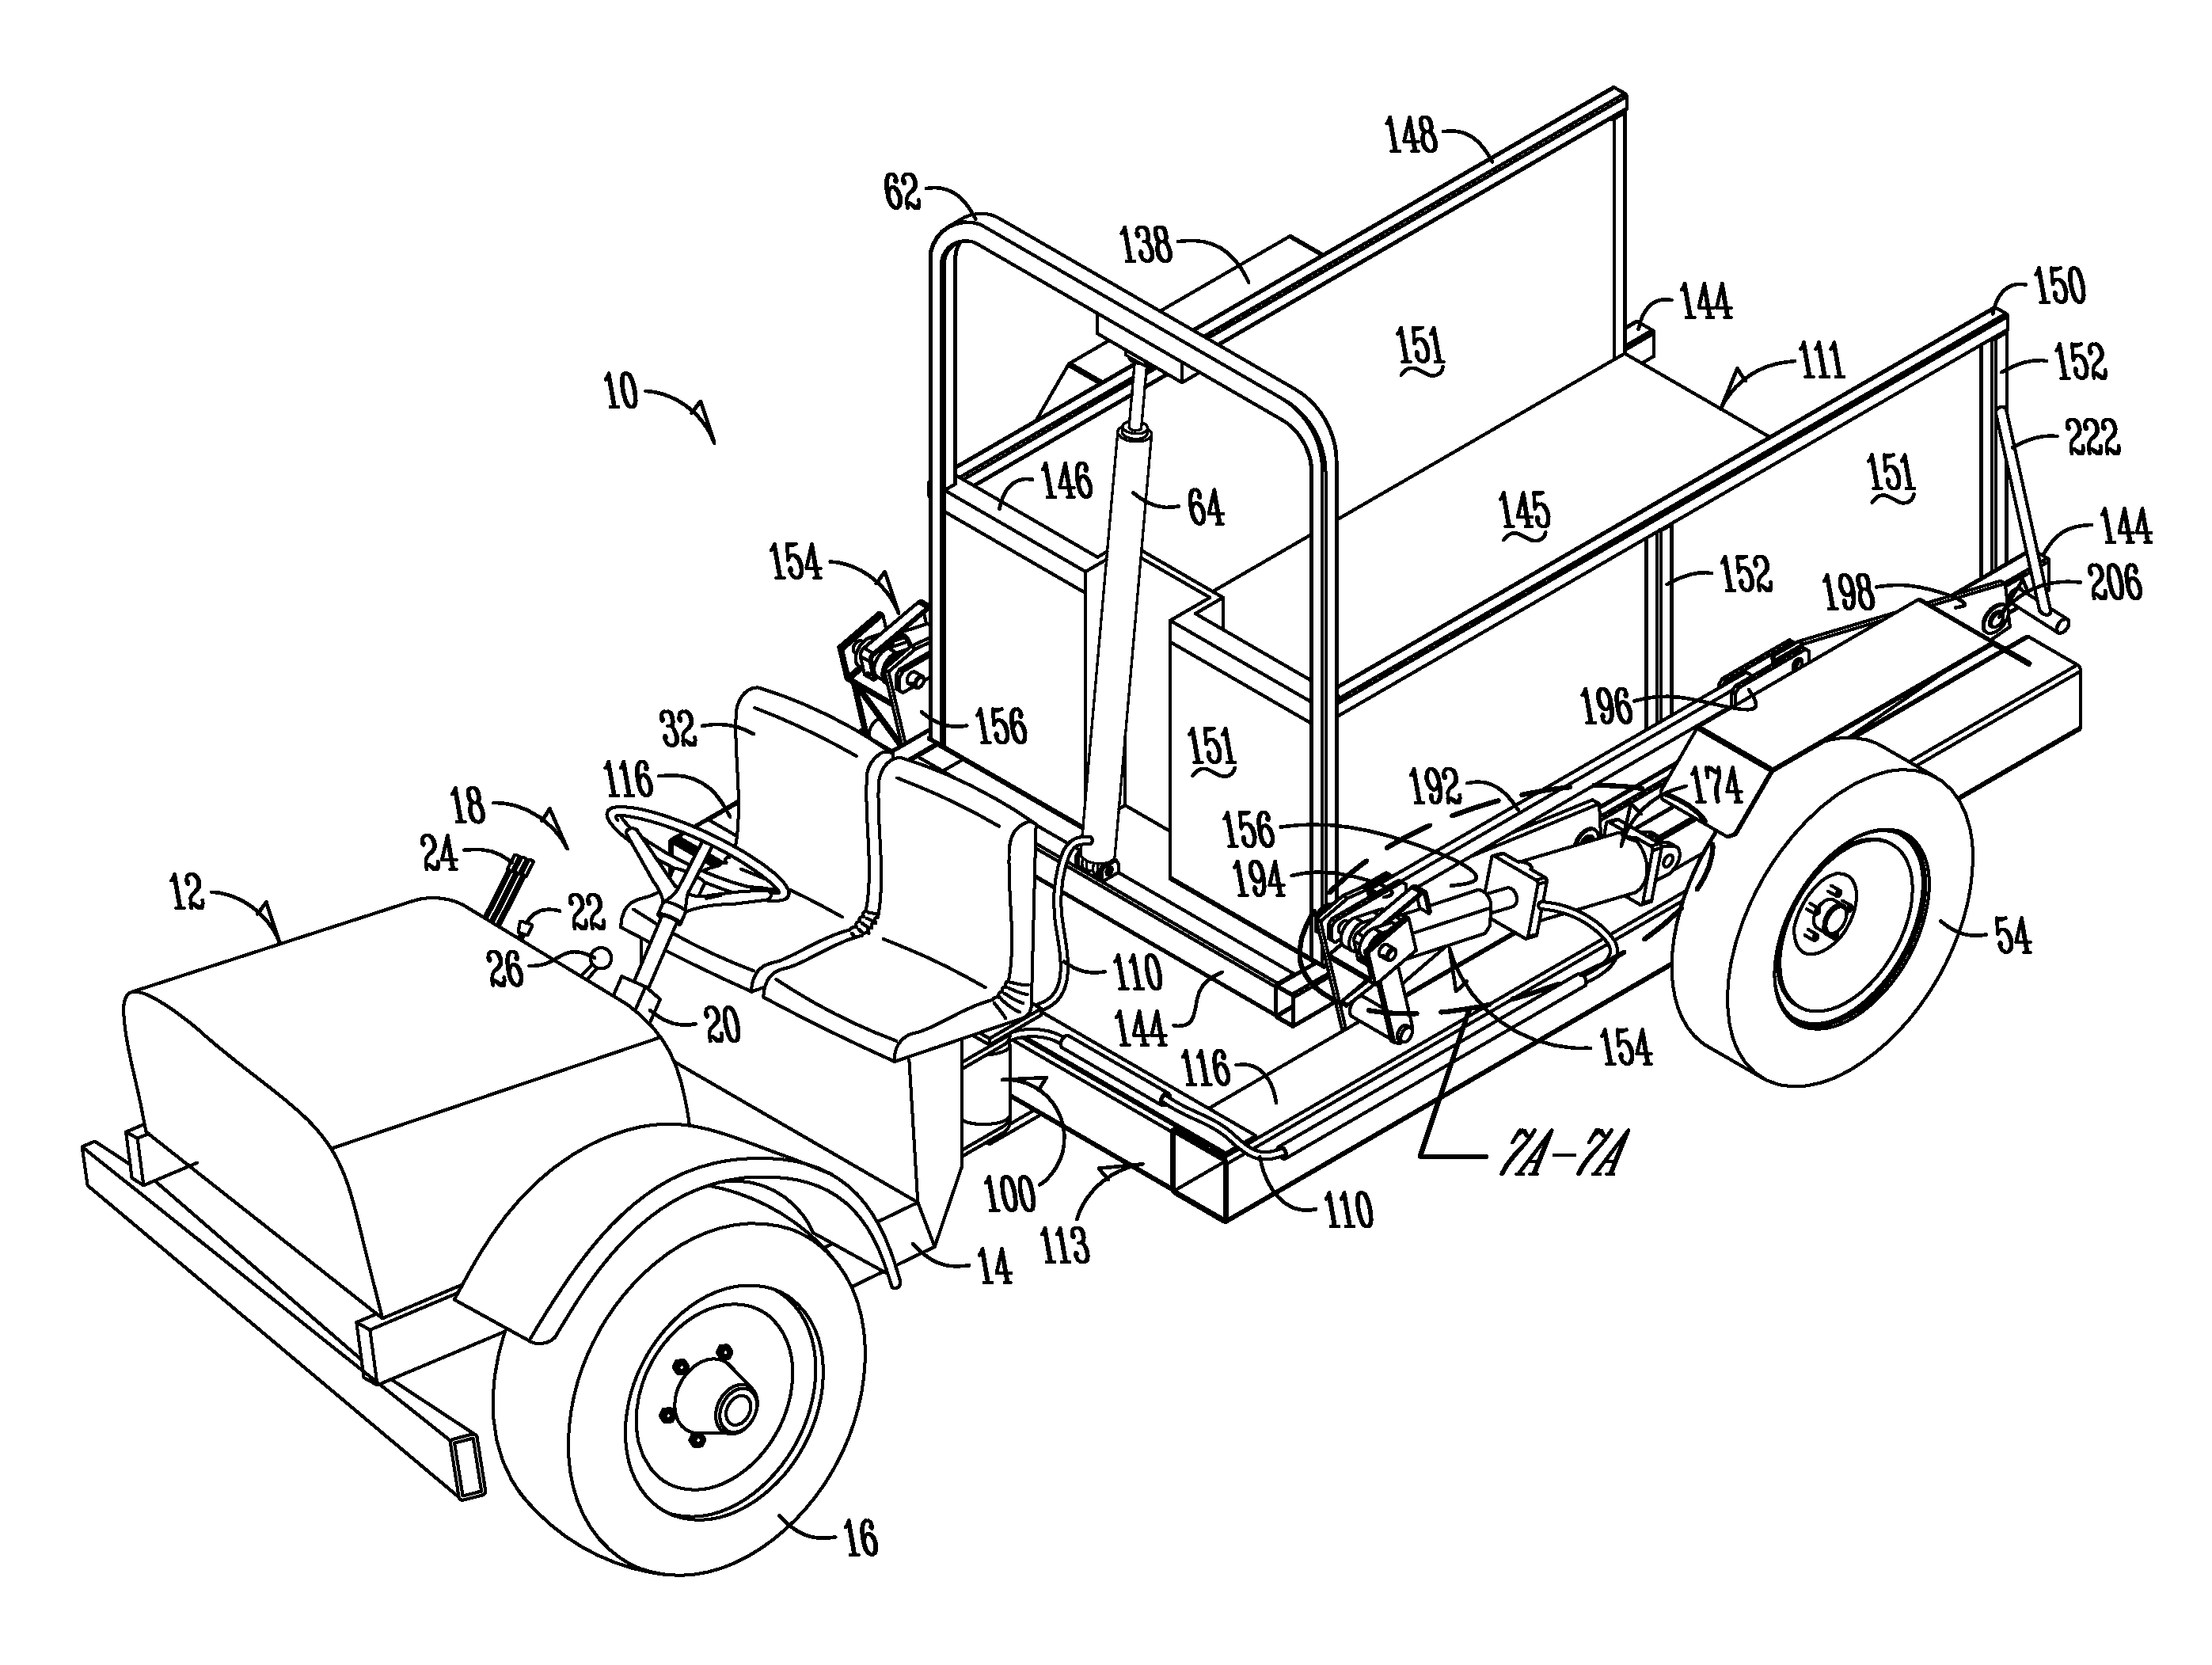 Center-pivot steering articulated vehicle with load lifting trailer